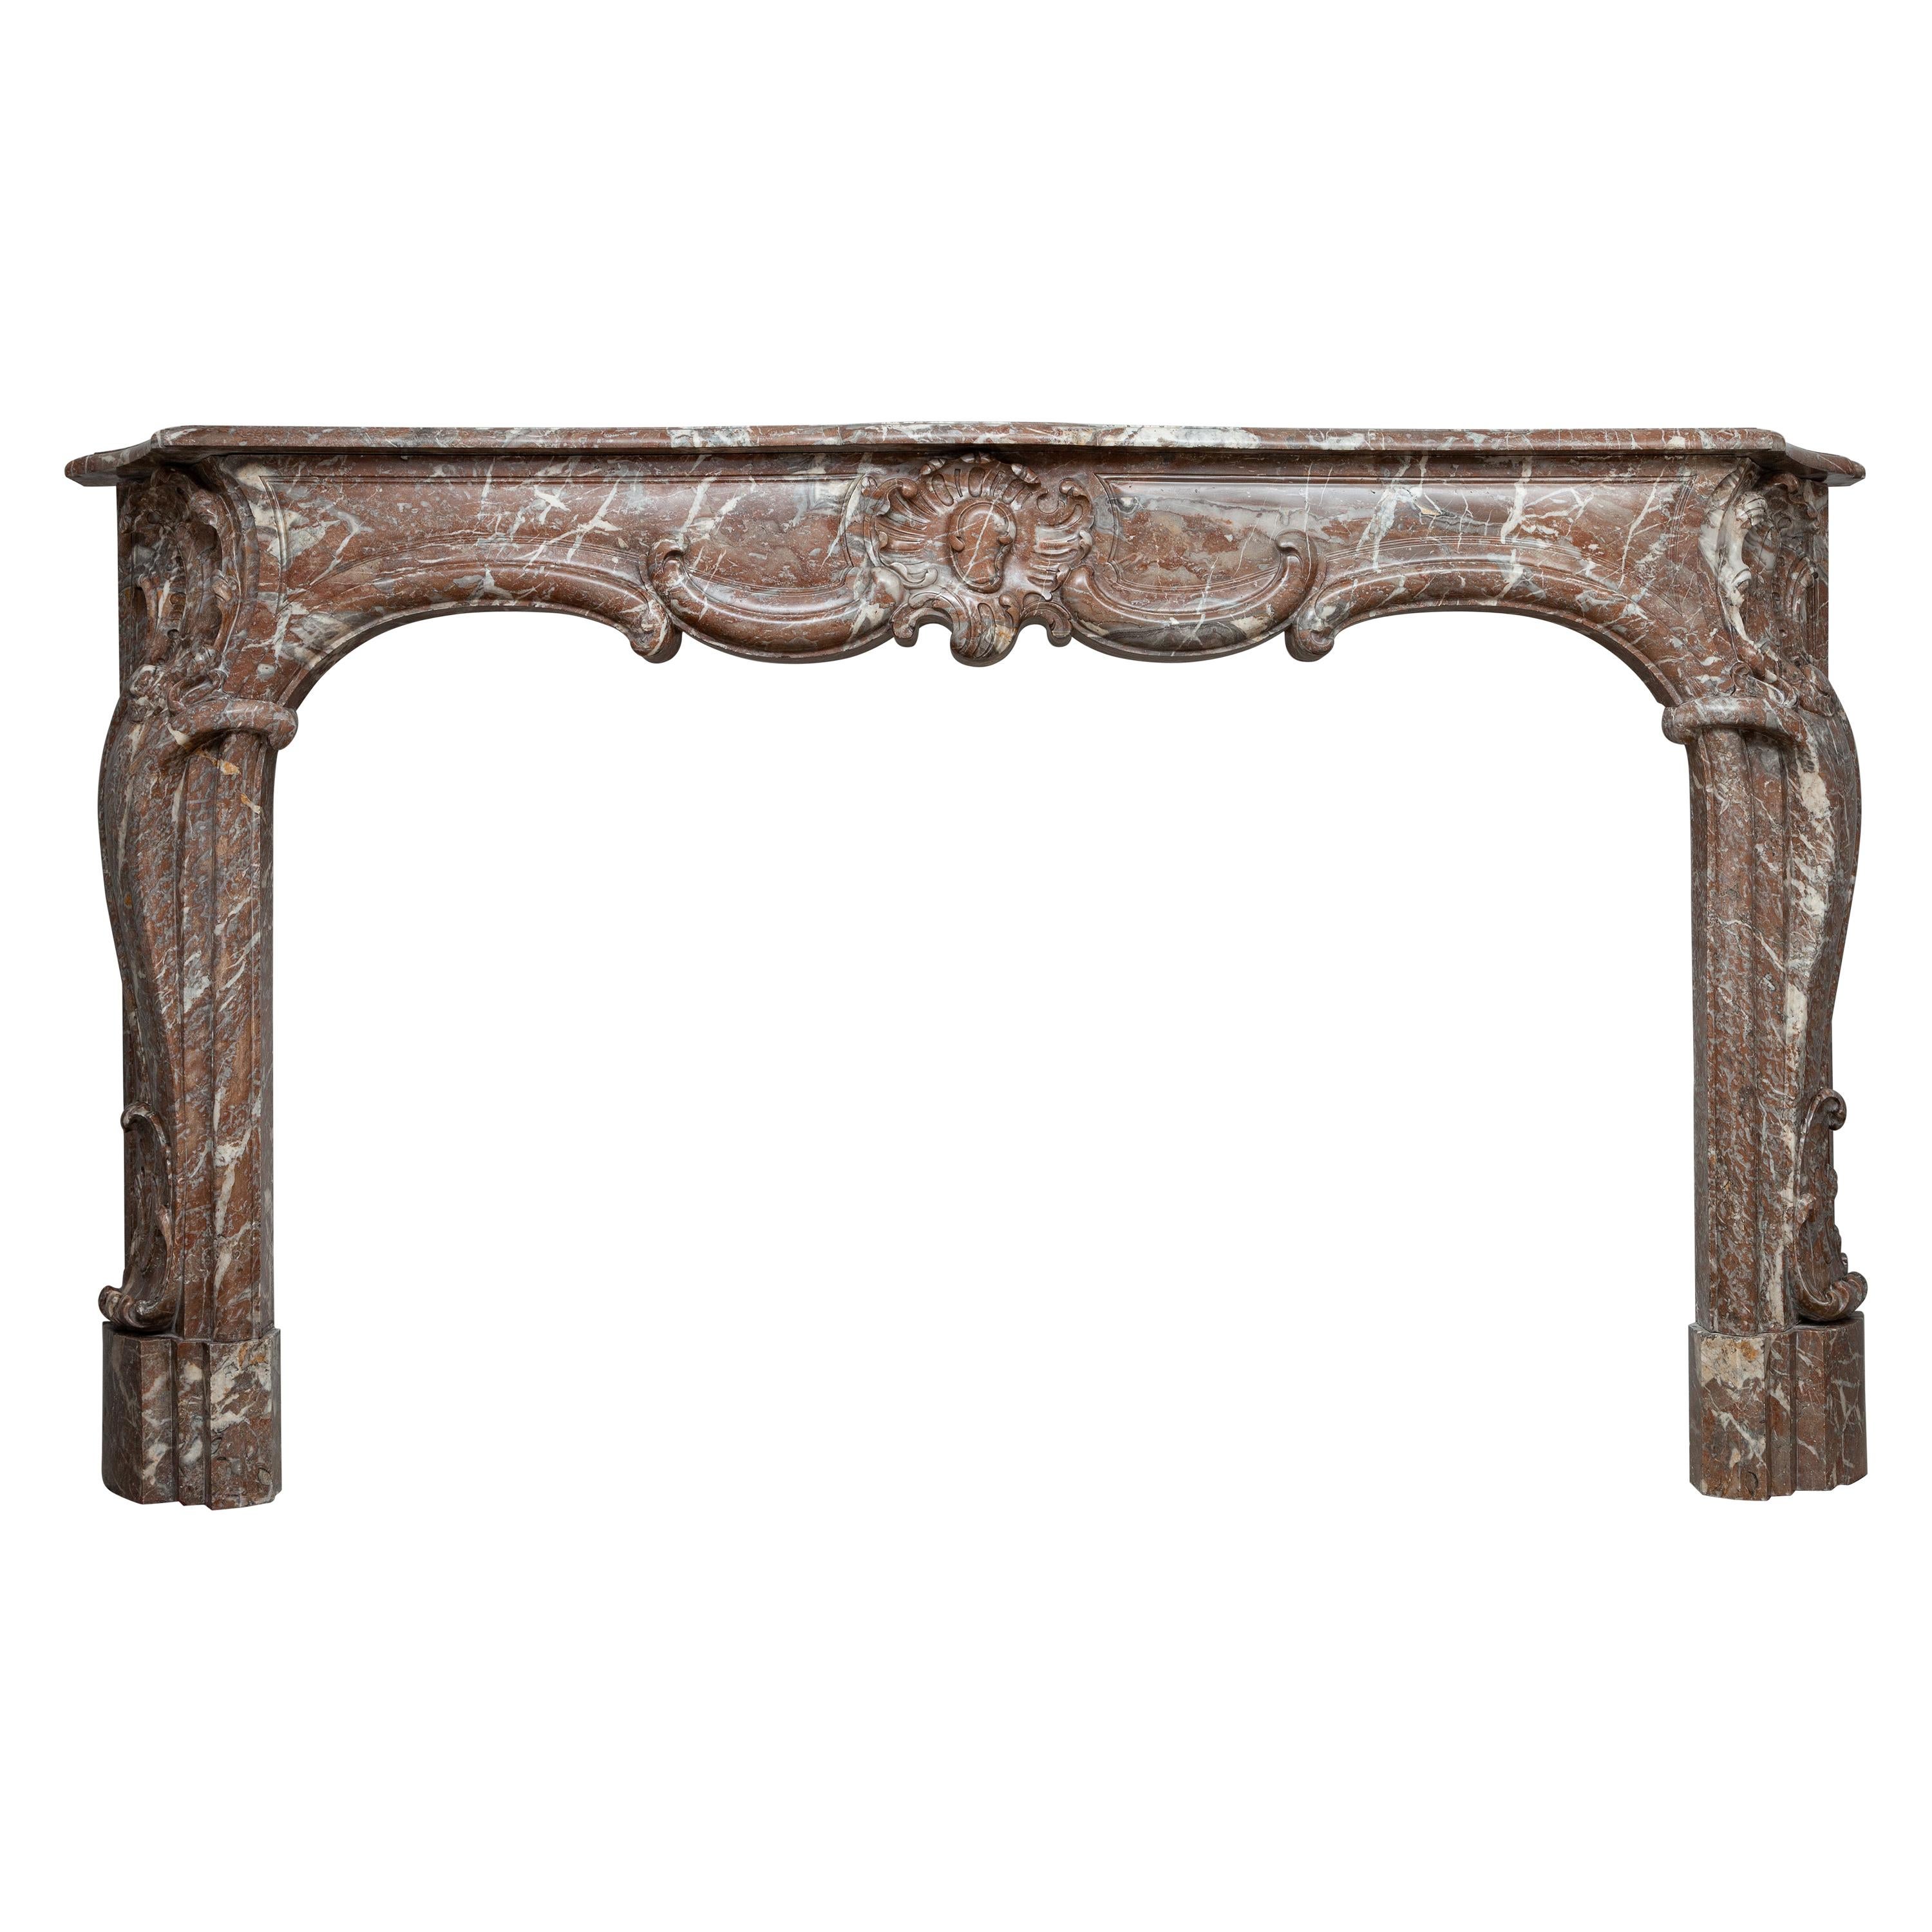 Unique 18th Century Rococo Style Marble Antique Fireplace